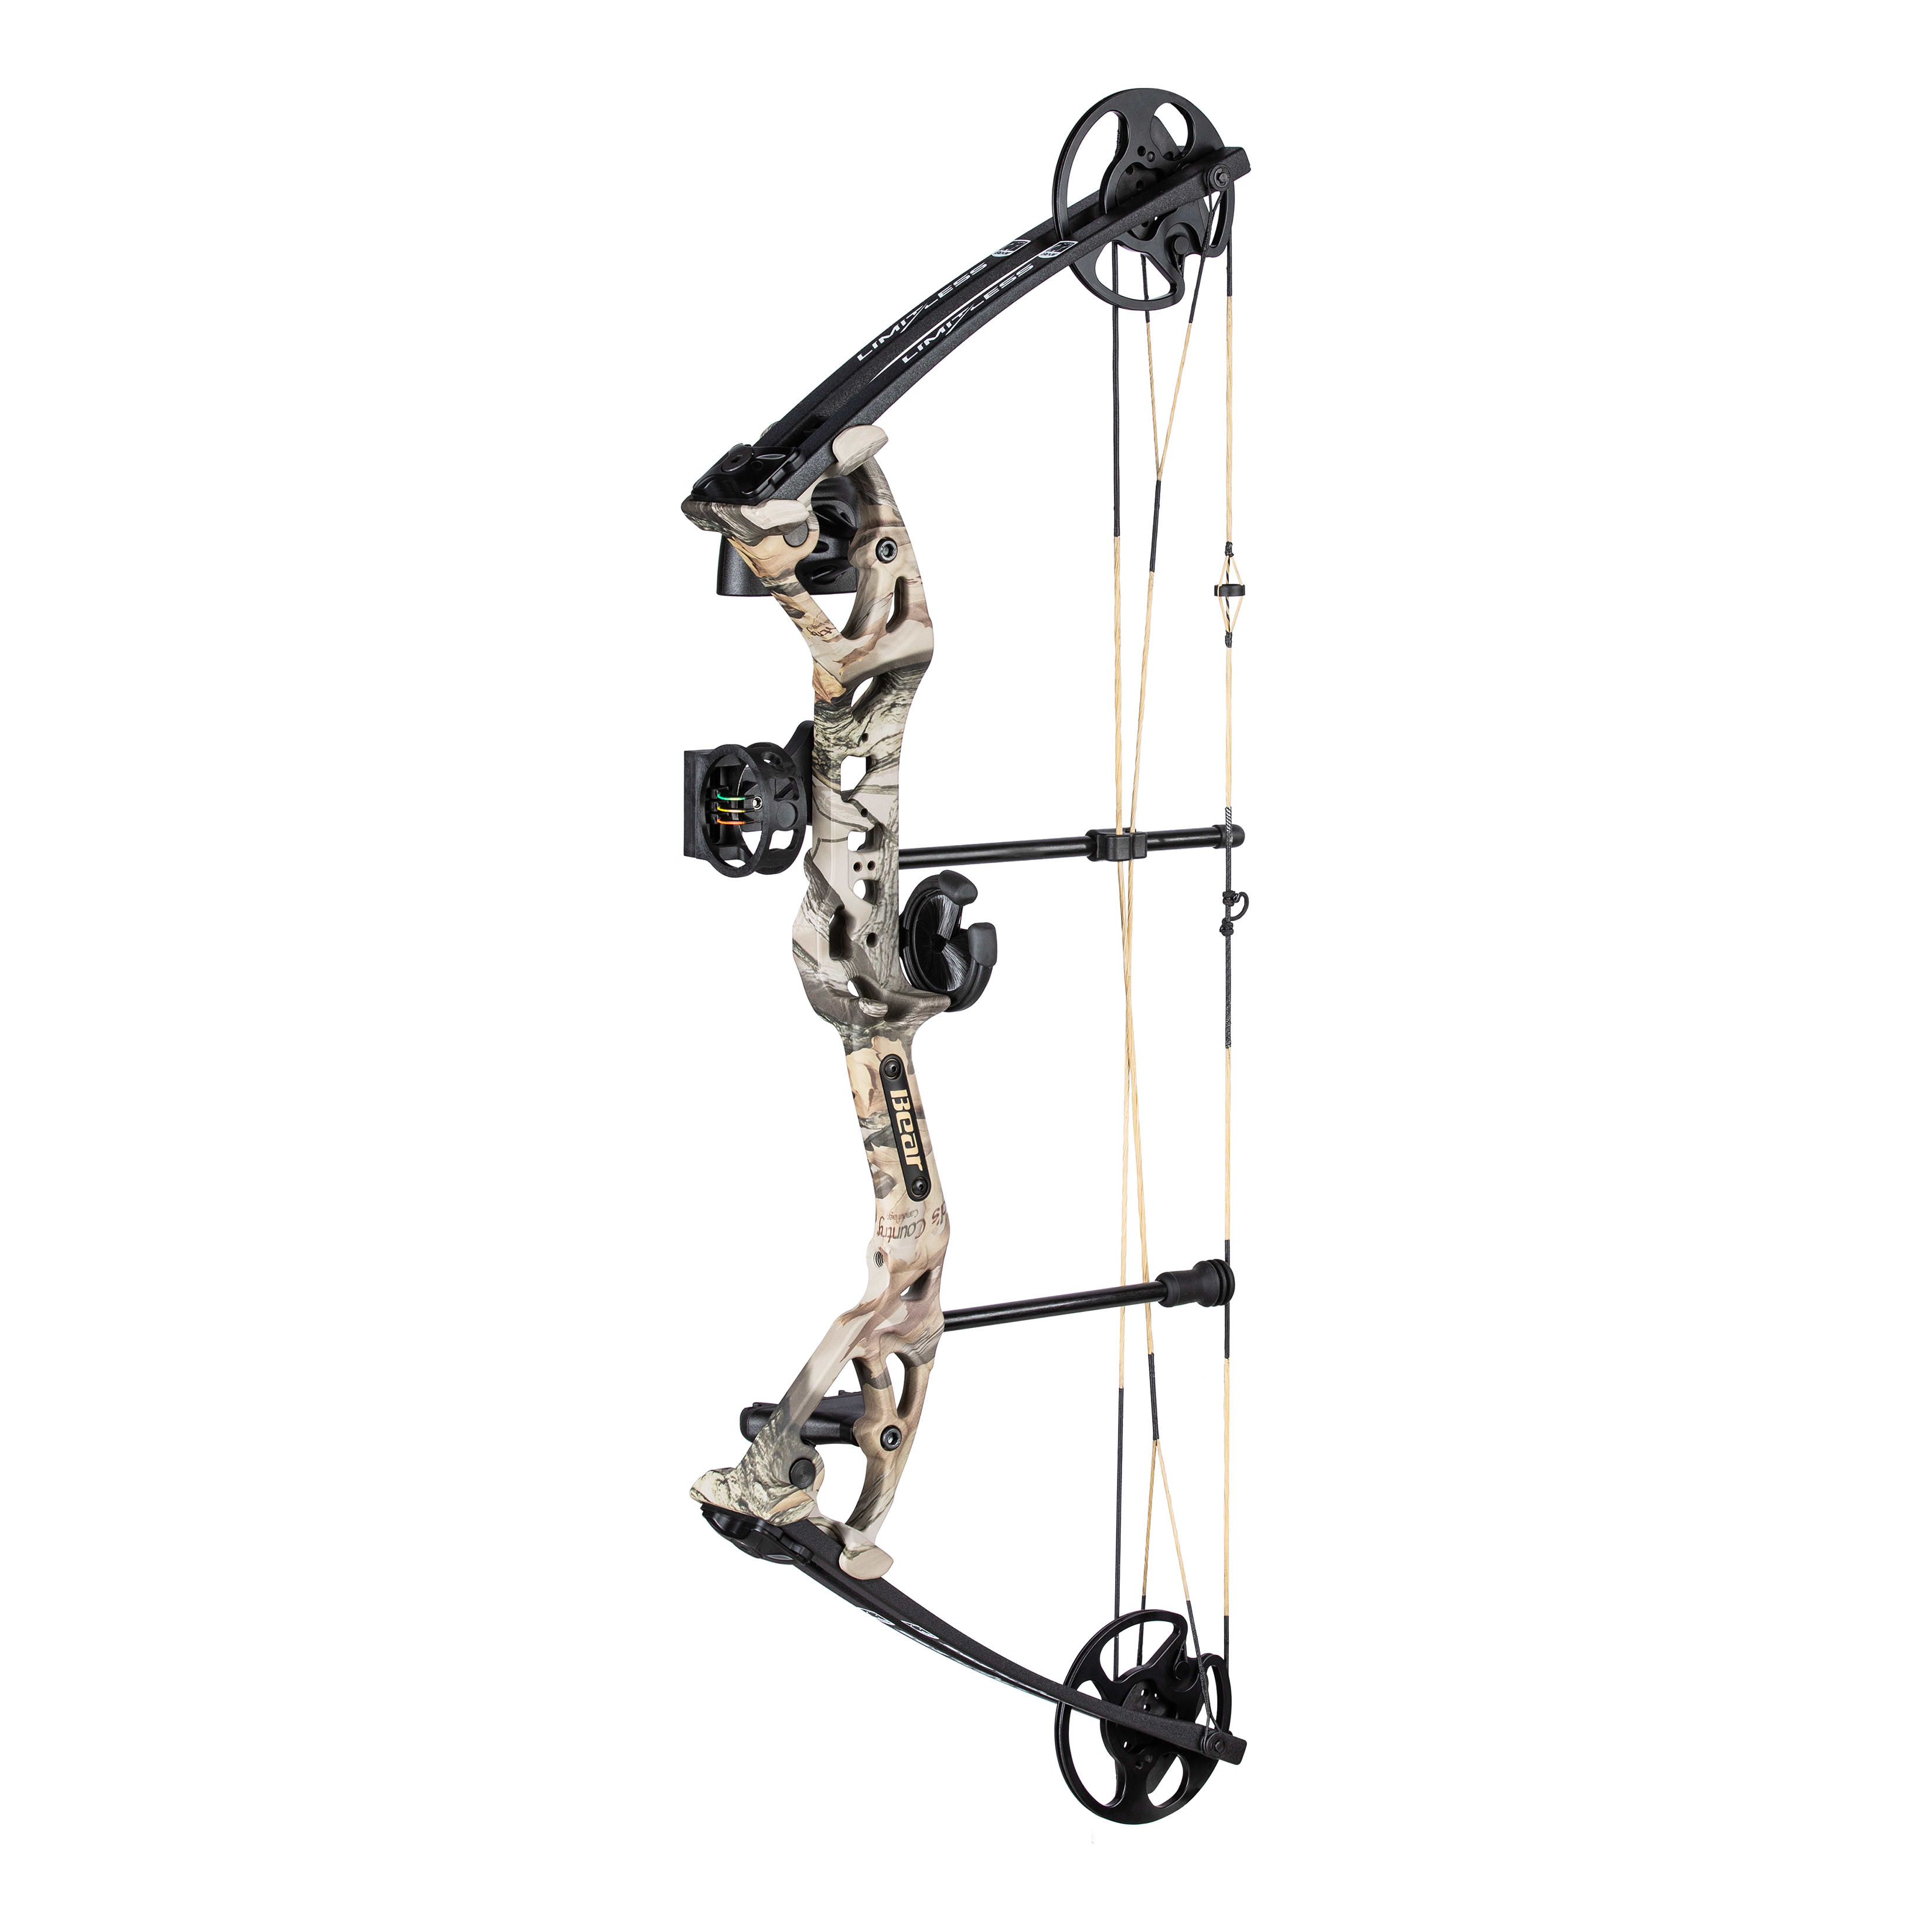 Bear® Archery Limitless Compound Bow Package